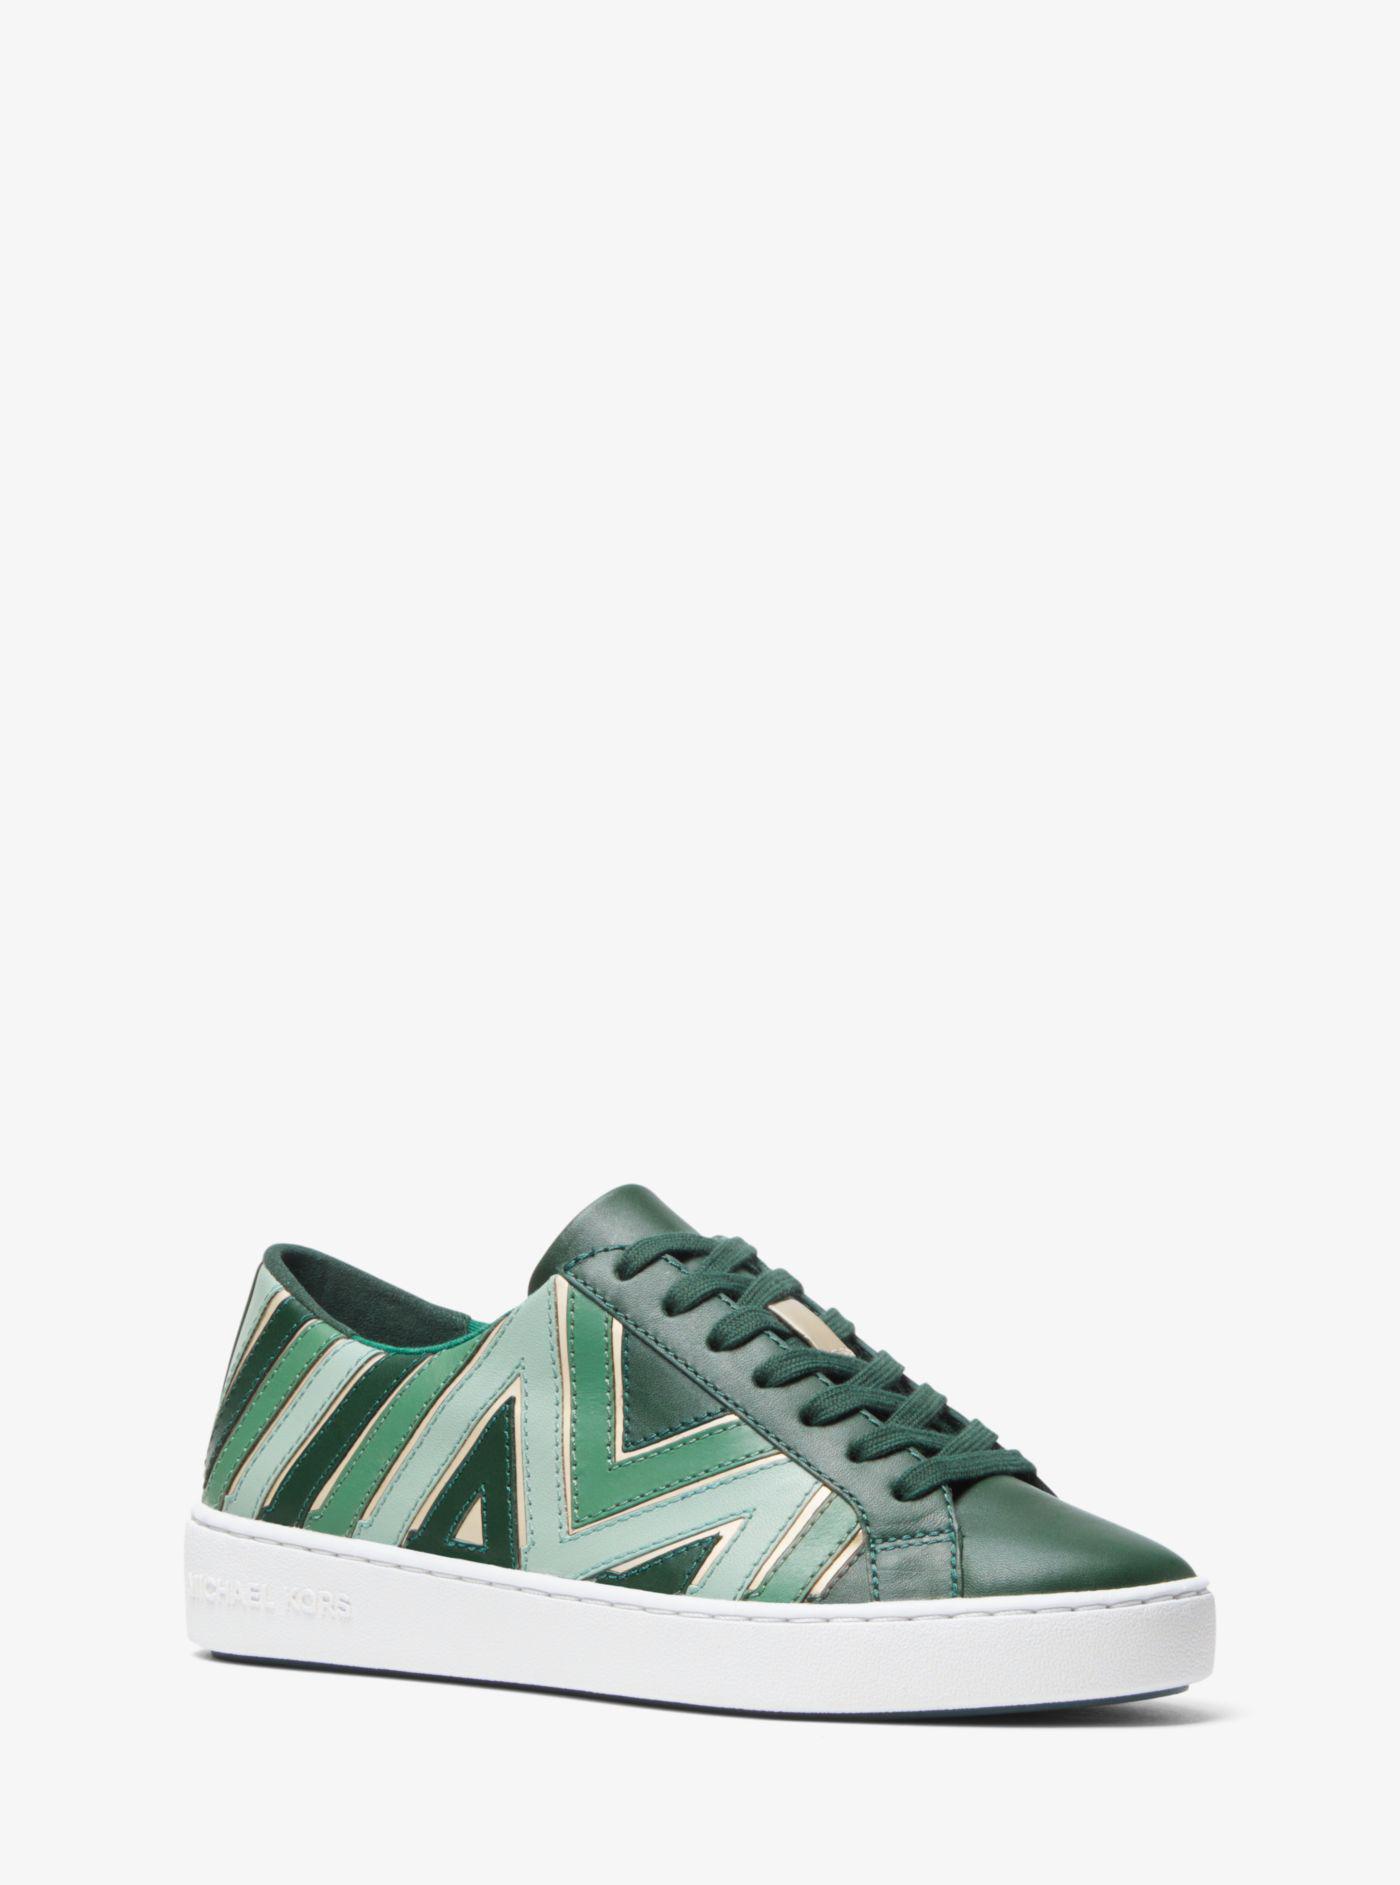 Kors Whitney Tri-color Leather Sneaker Racing Green (Green)